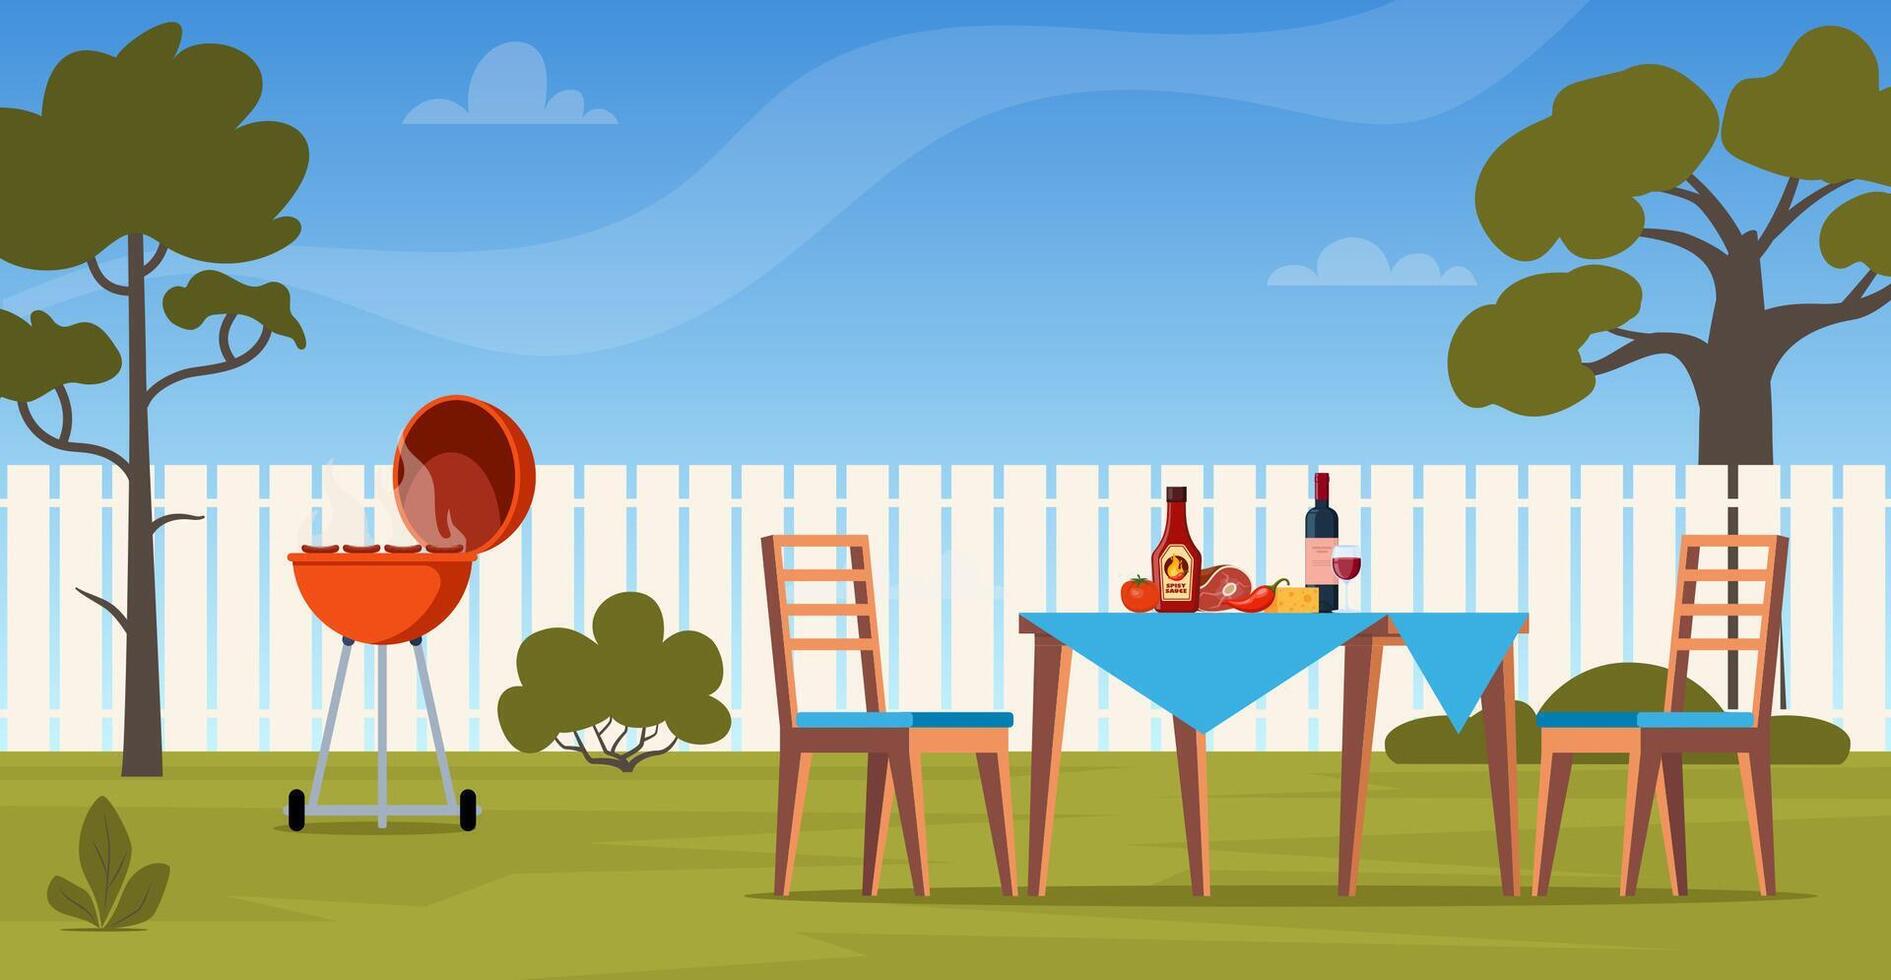 Barbeque scene on backyard. Table, chairs, food. Grilling meat and vegetables outside. Backyard picnic on a weekend. Vector illustration.